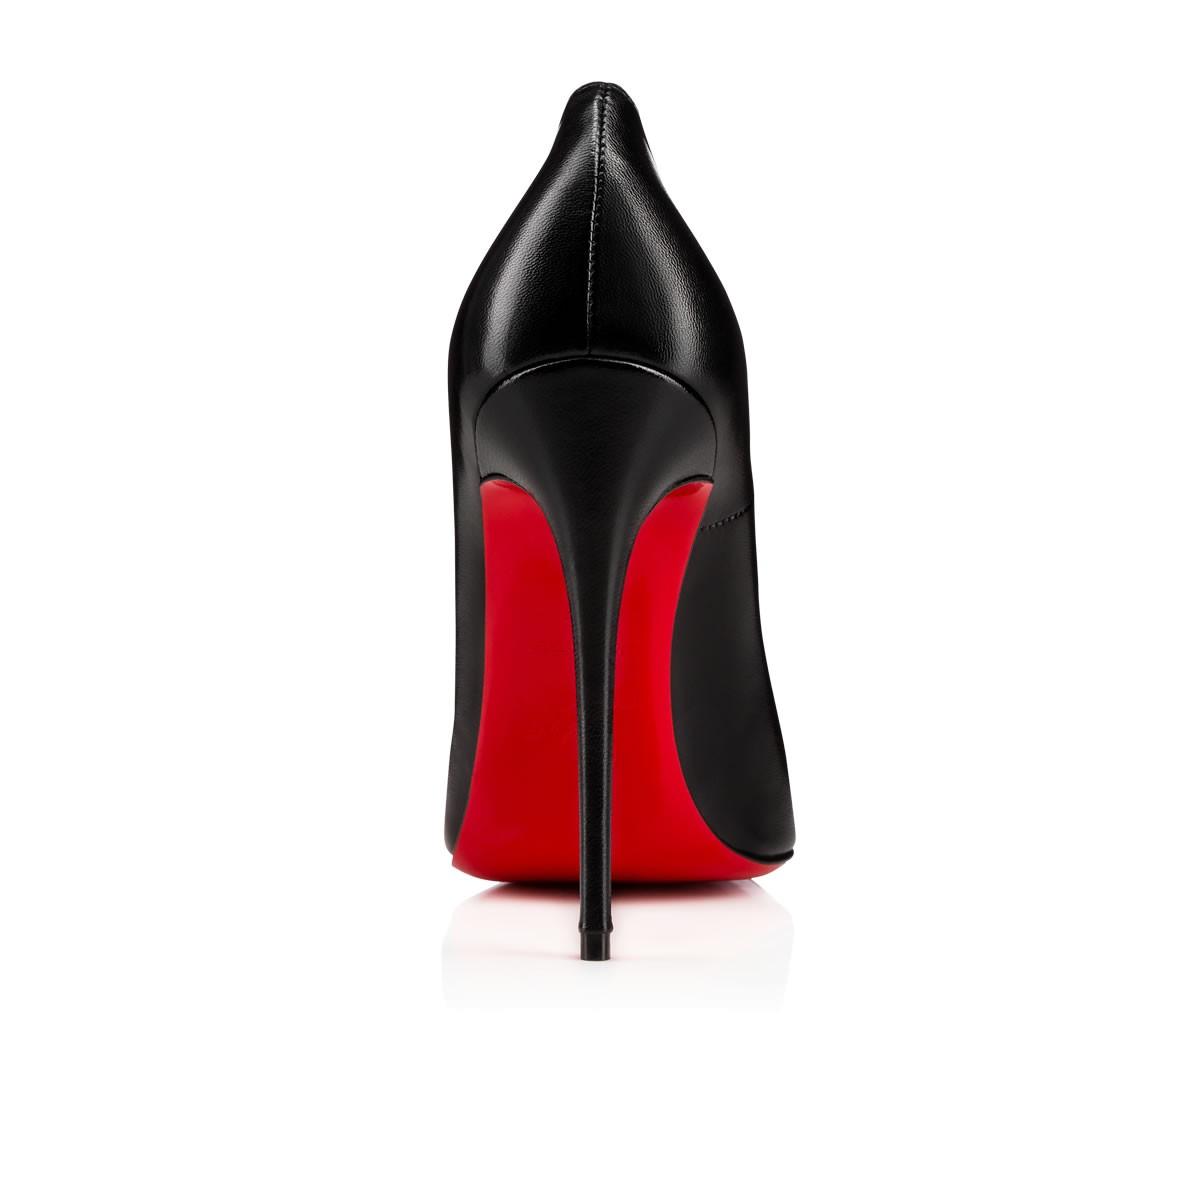 Christian Louboutin Dorissima Patent Leather Pumps in Black - Save 3% ...